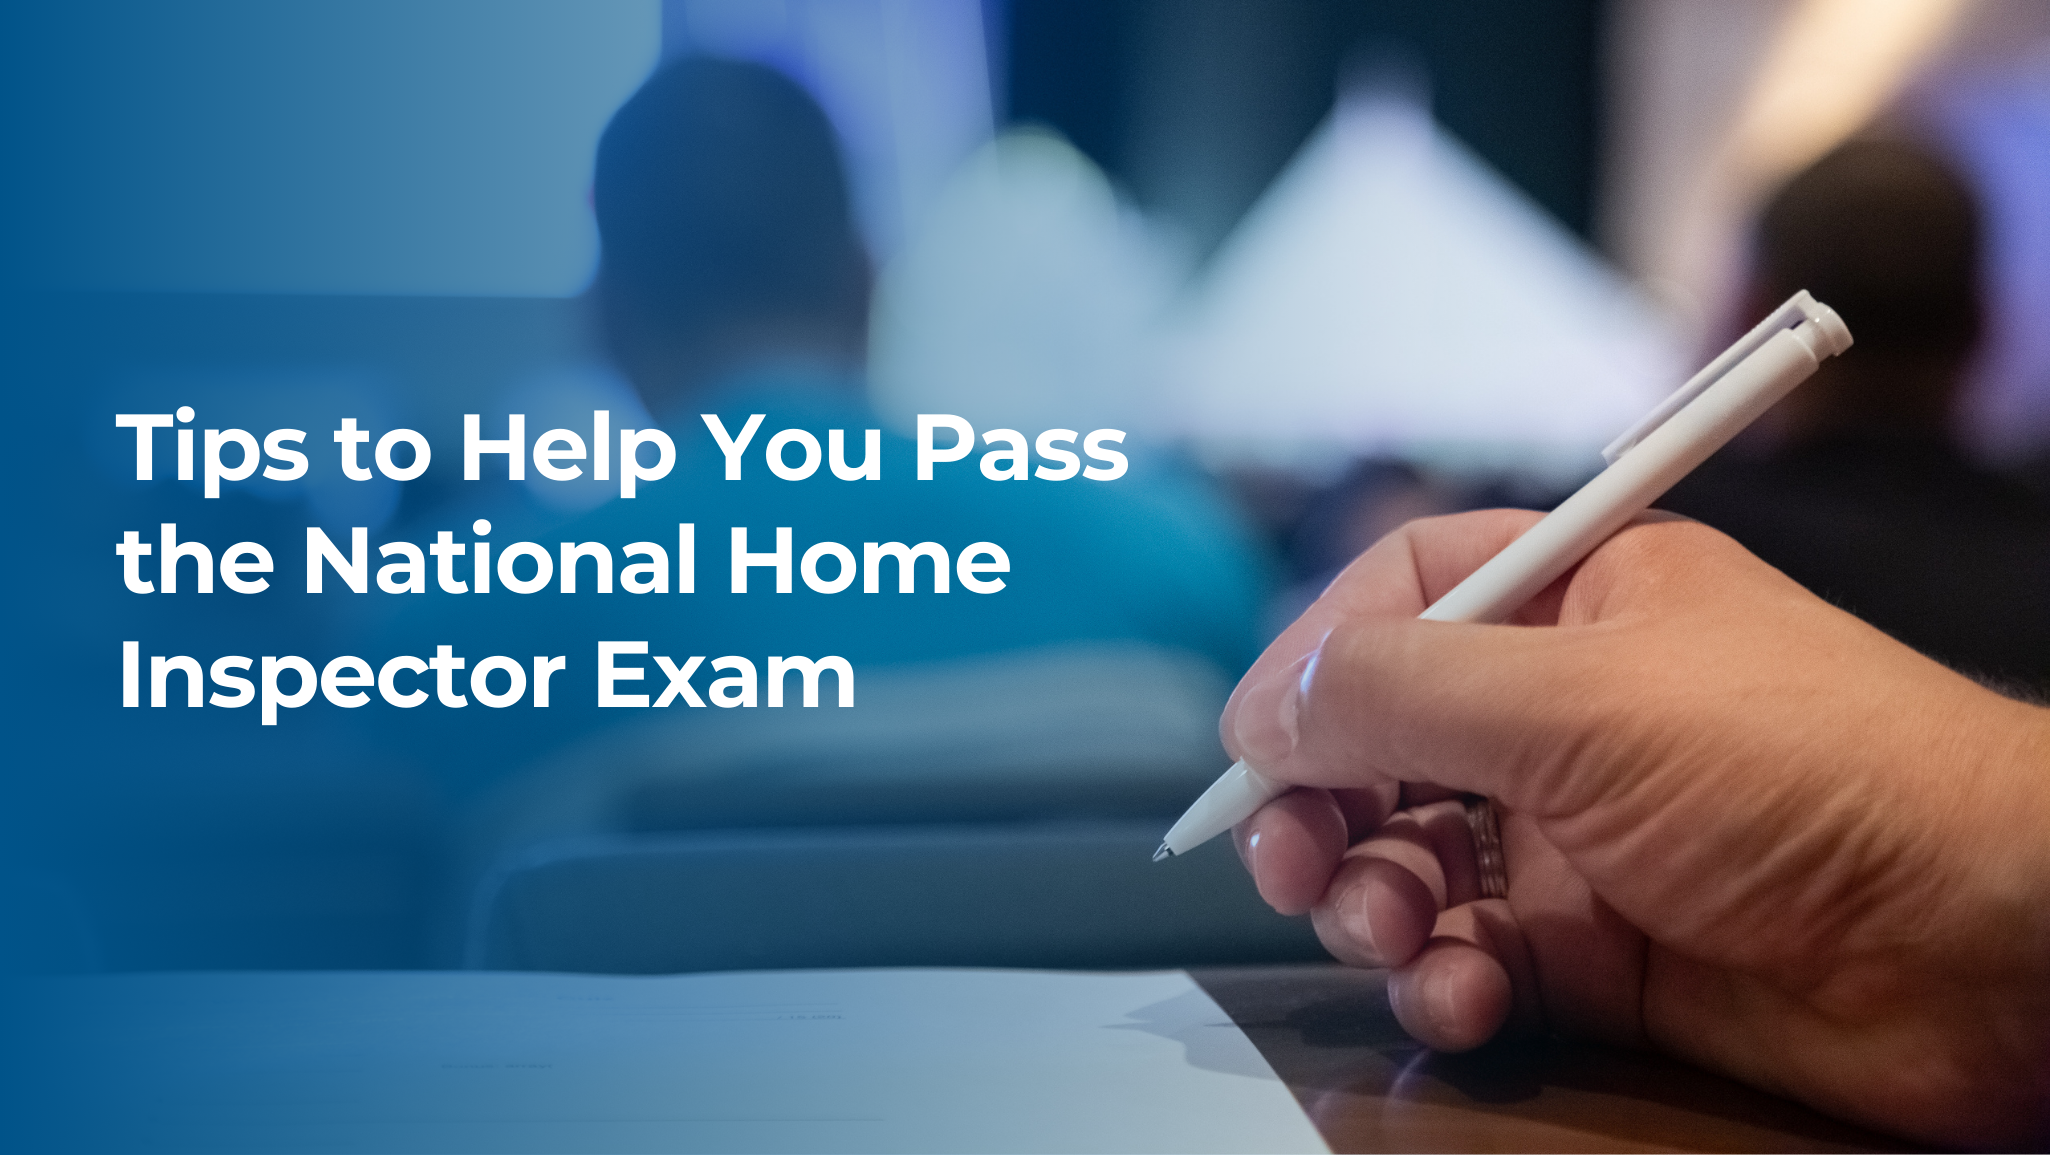 Tips to Help You Pass the National Home Inspector Exam (NHIE)